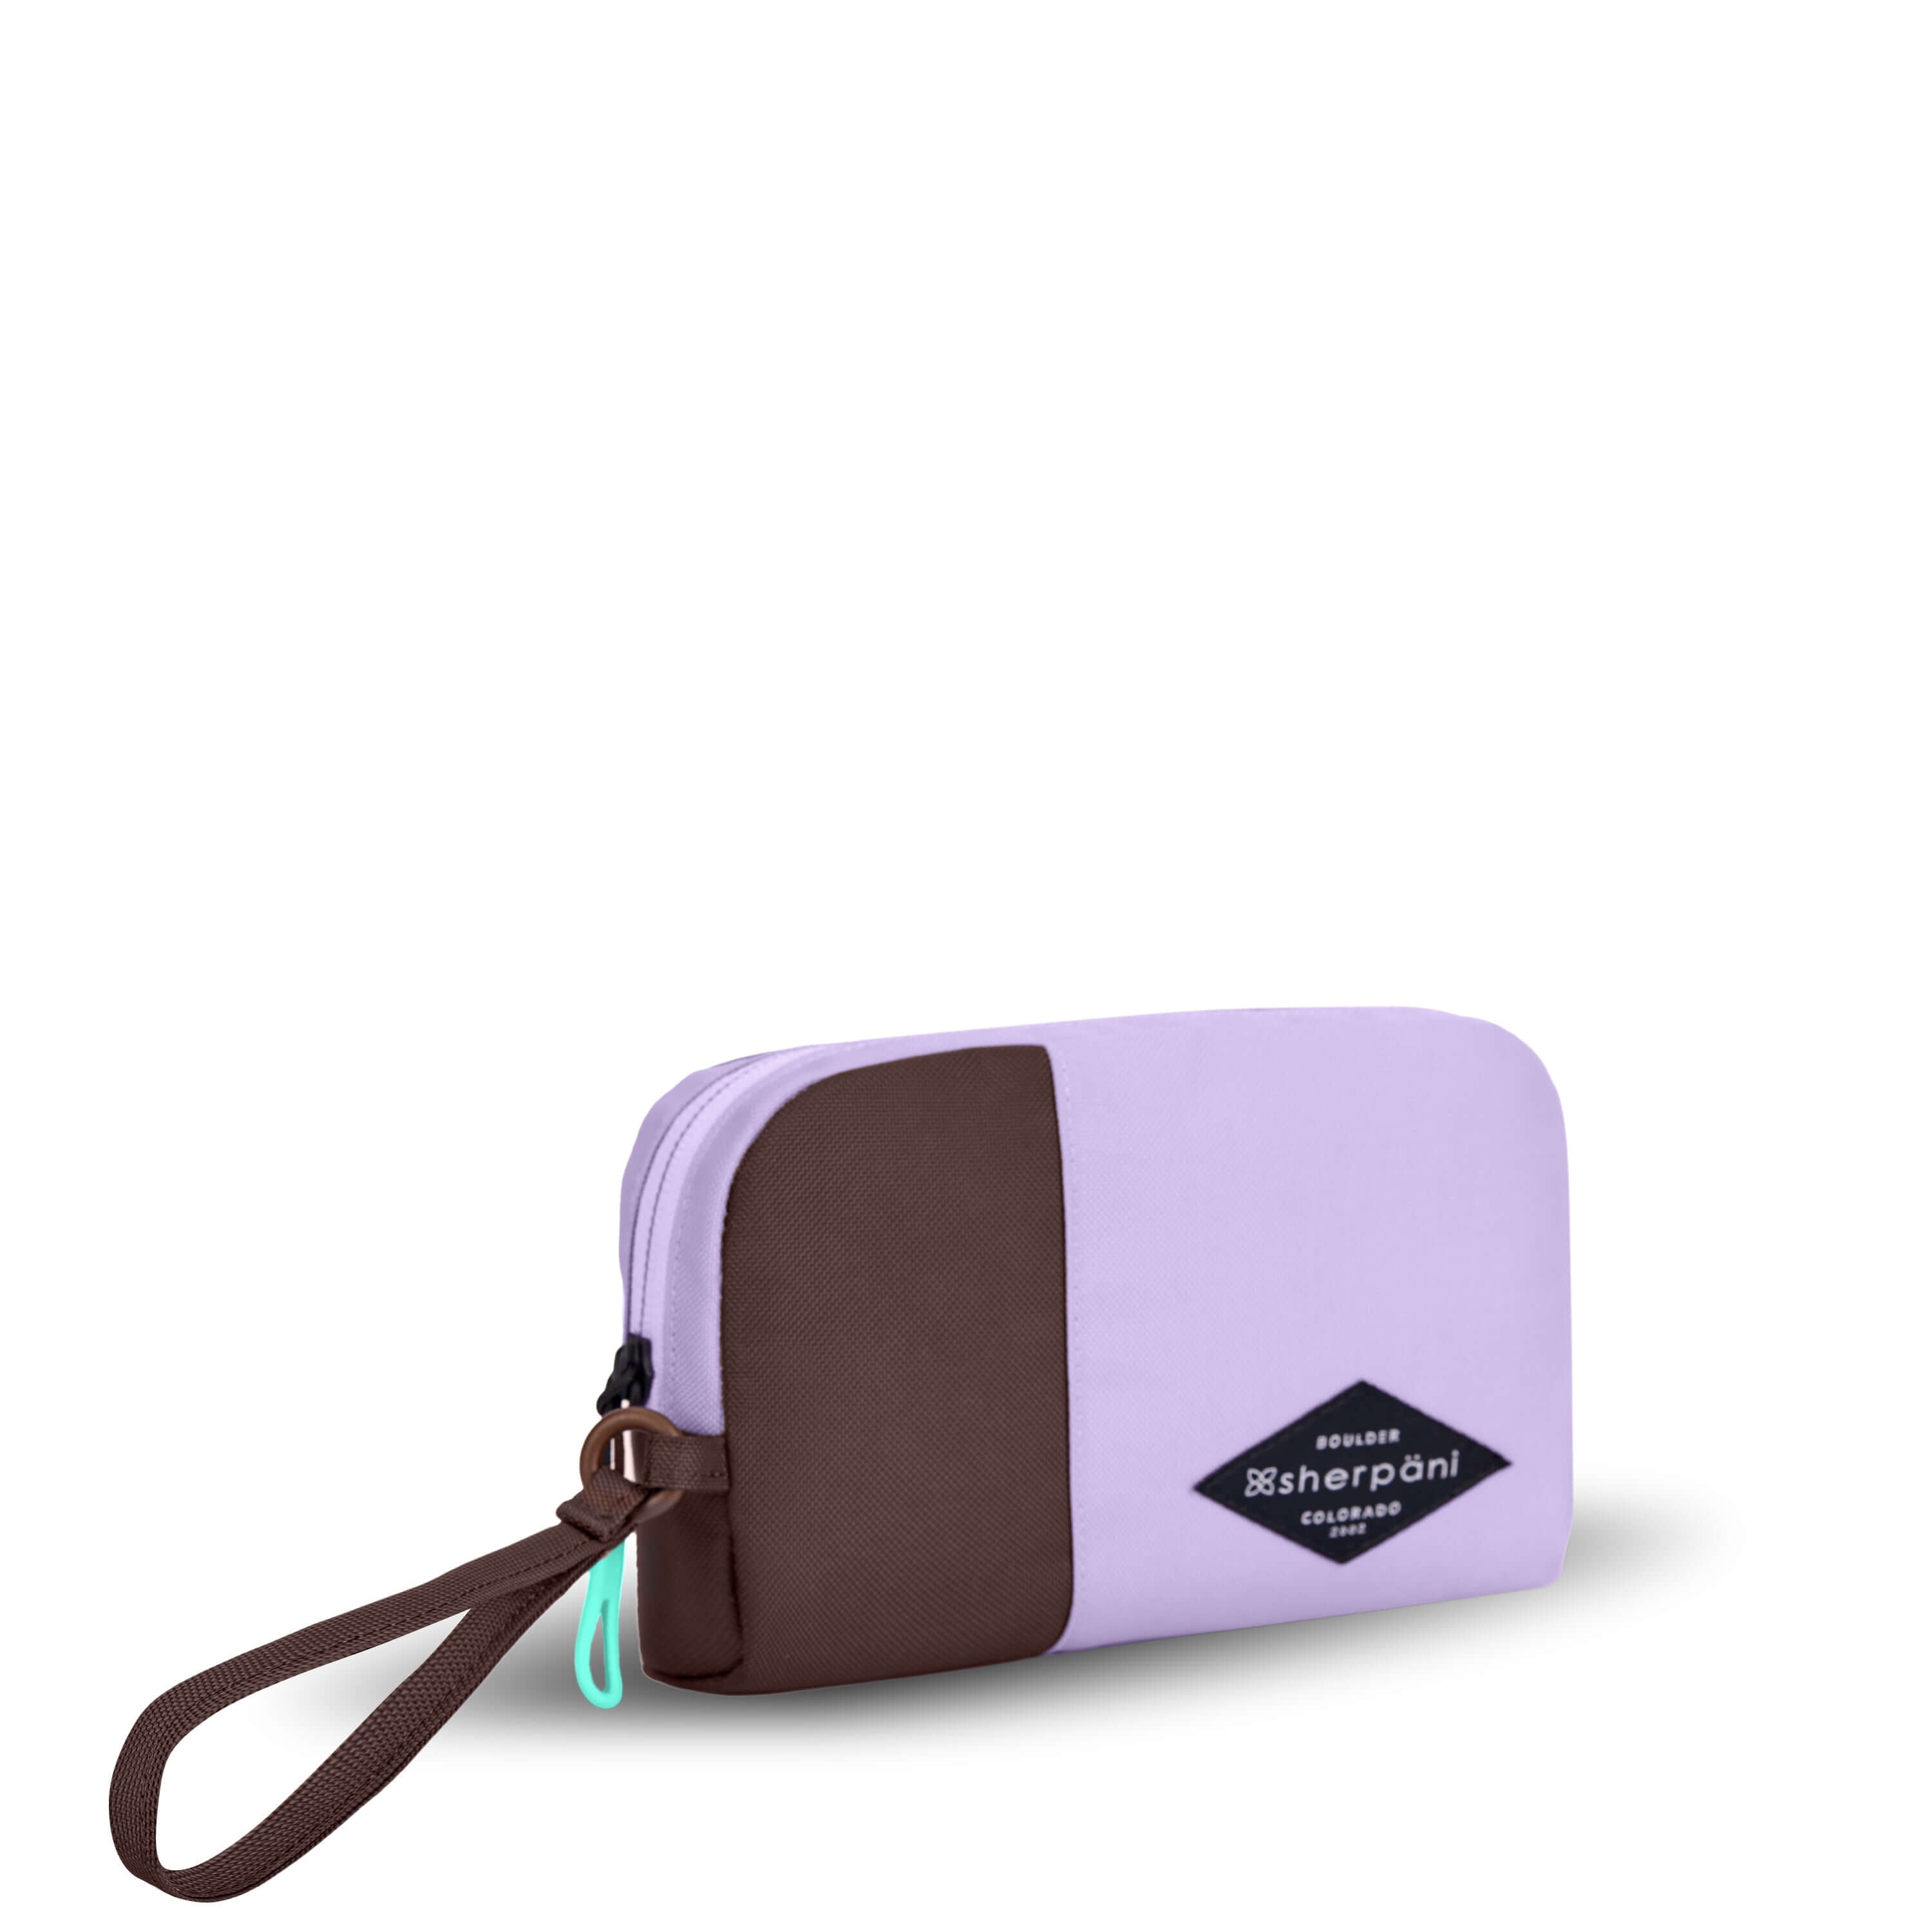 Angled front view of Sherpani travel accessory, the Jolie in Lavender, in medium size. The pouch is two-toned in lavender and brown. It features a brown wristlet strap and an easy-pull zipper accented in aqua.